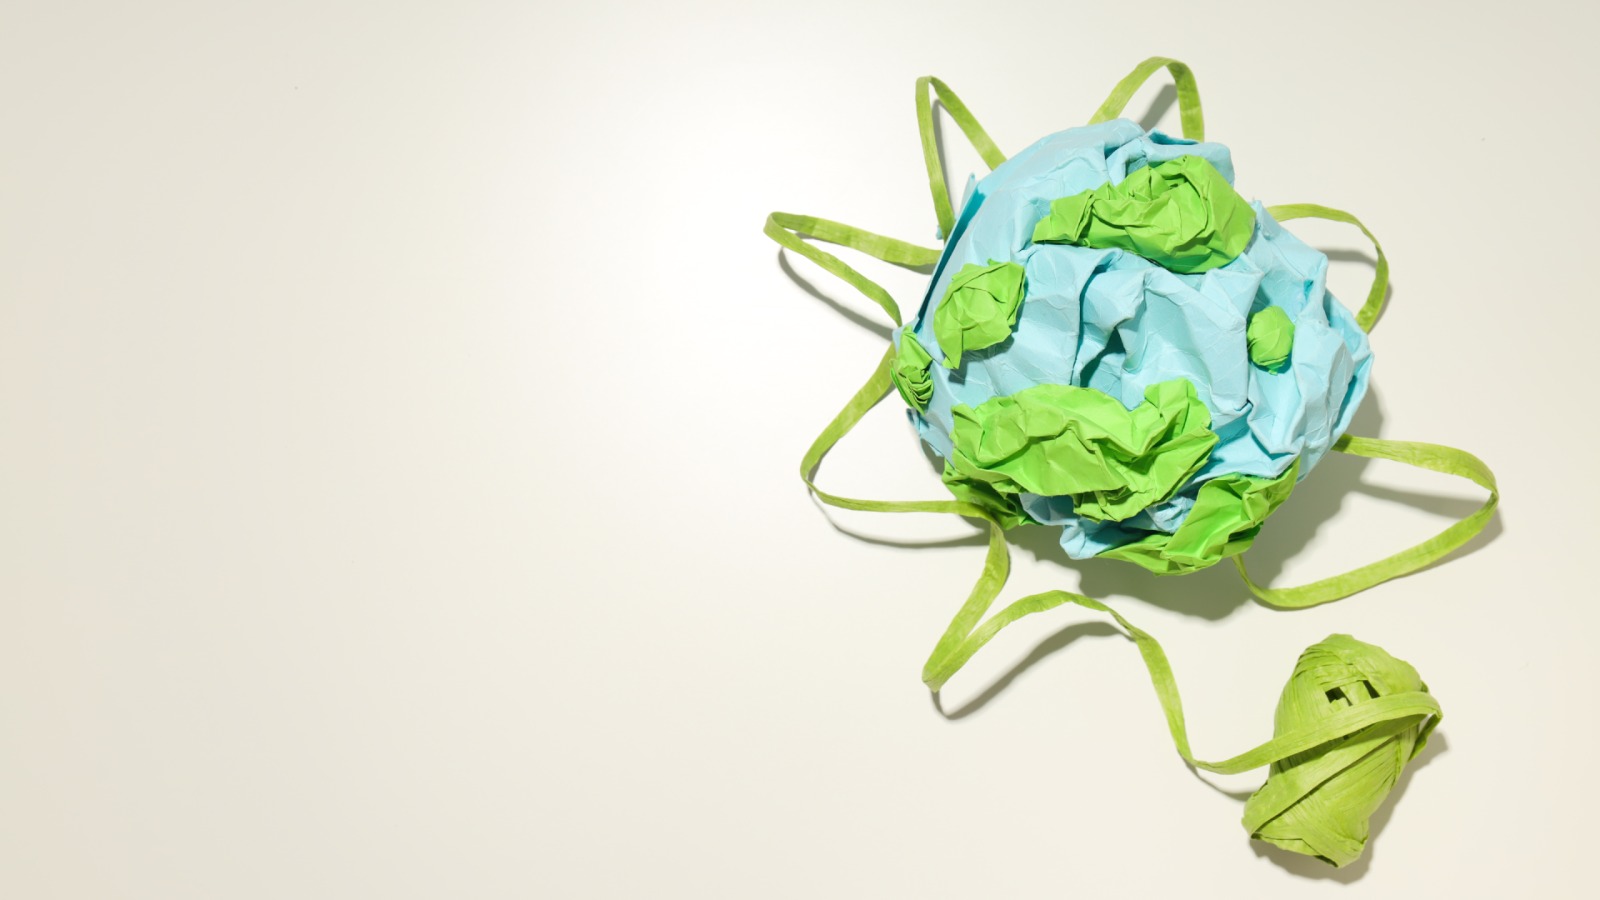 An artistic model of the Earth created with blue and green paper, emphasizing eco-friendly and sustainable practices.